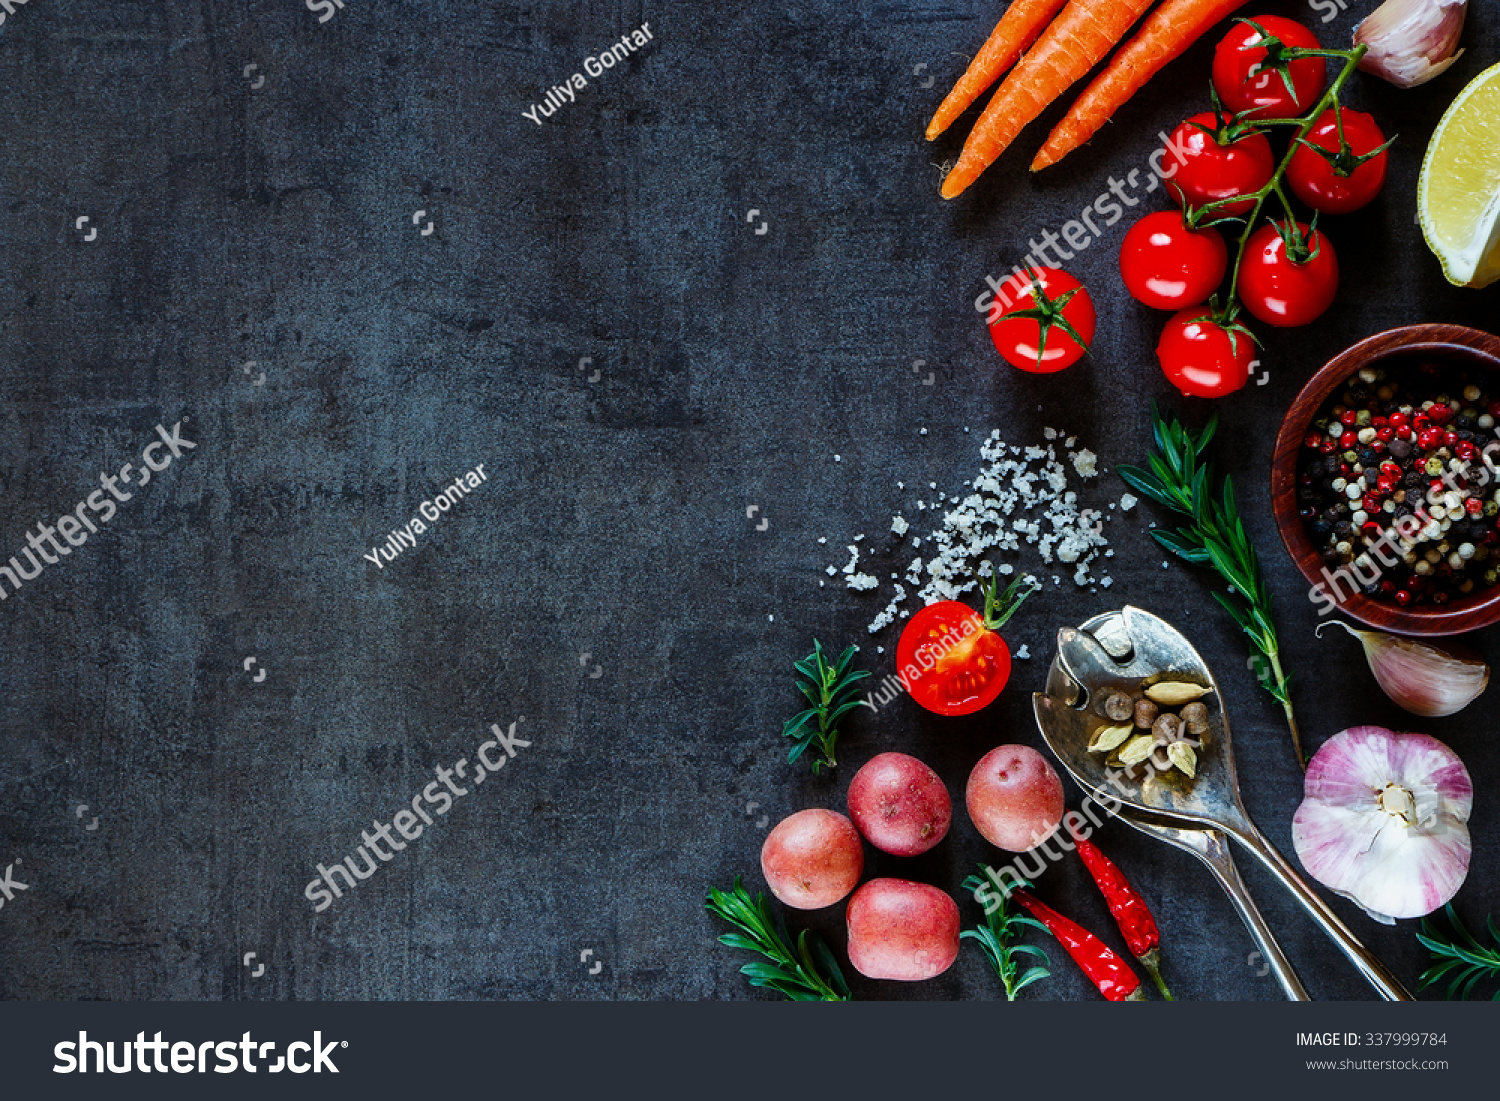 990,631 Vegetables on board Images, Stock Photos & Vectors | Shutterstock